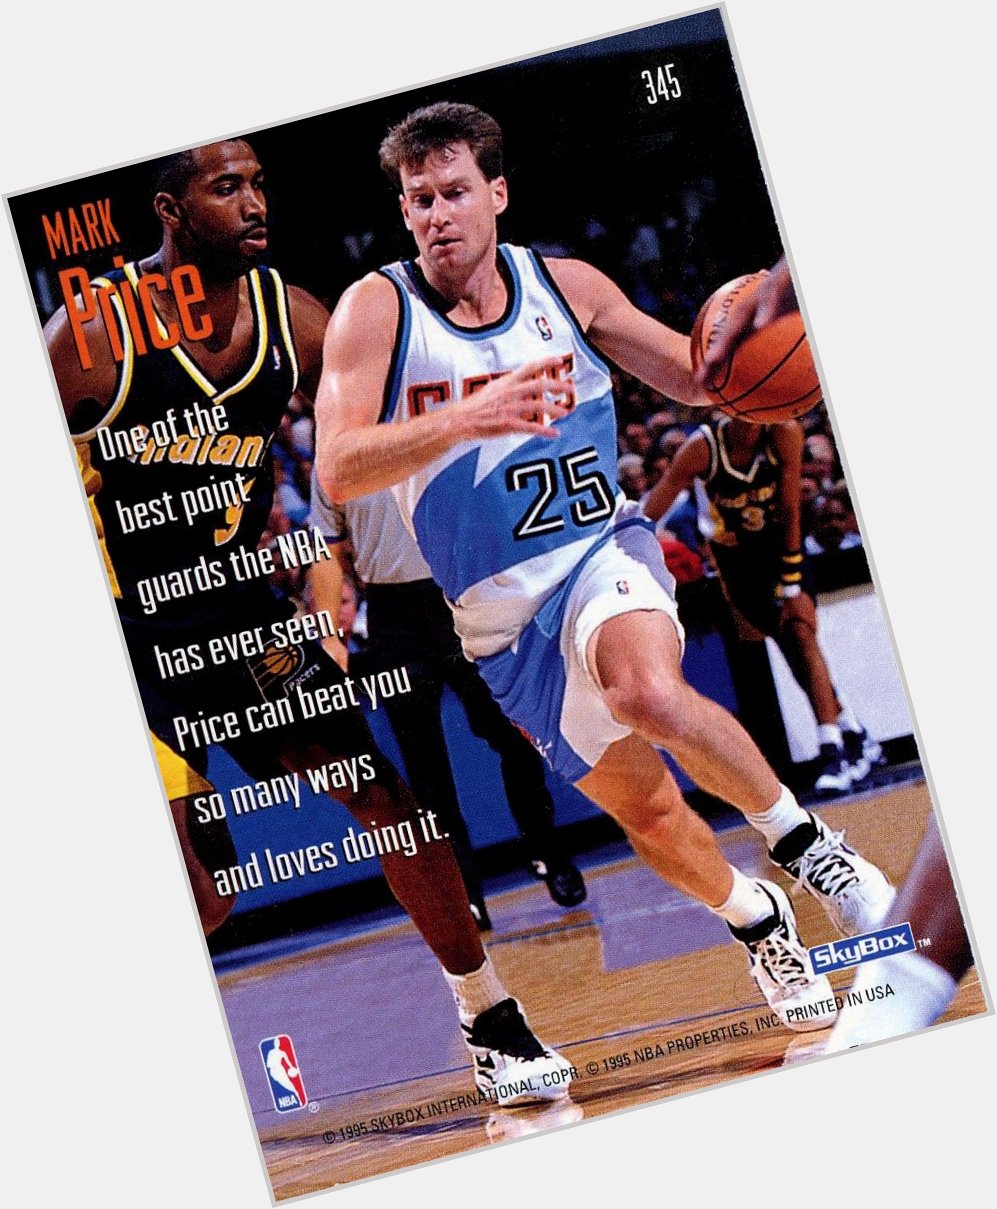 Happy birthday to Mark Price! The copy on this card, \"and loves doing it\" always cracked me up. 